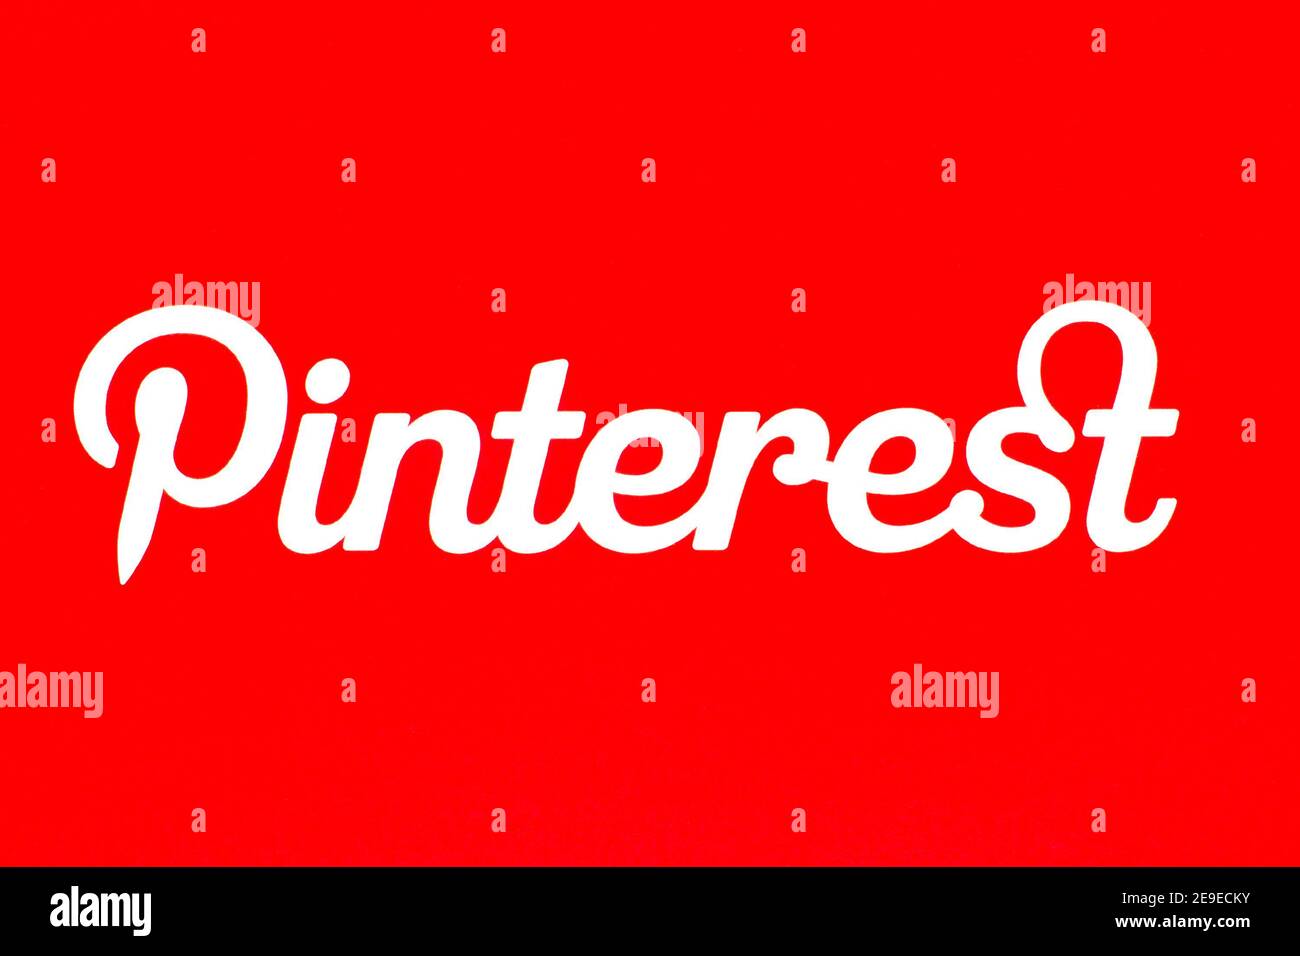 Pinterest logo printed on paper. Facebook is an online social networking and microblogging service. Stock Photo